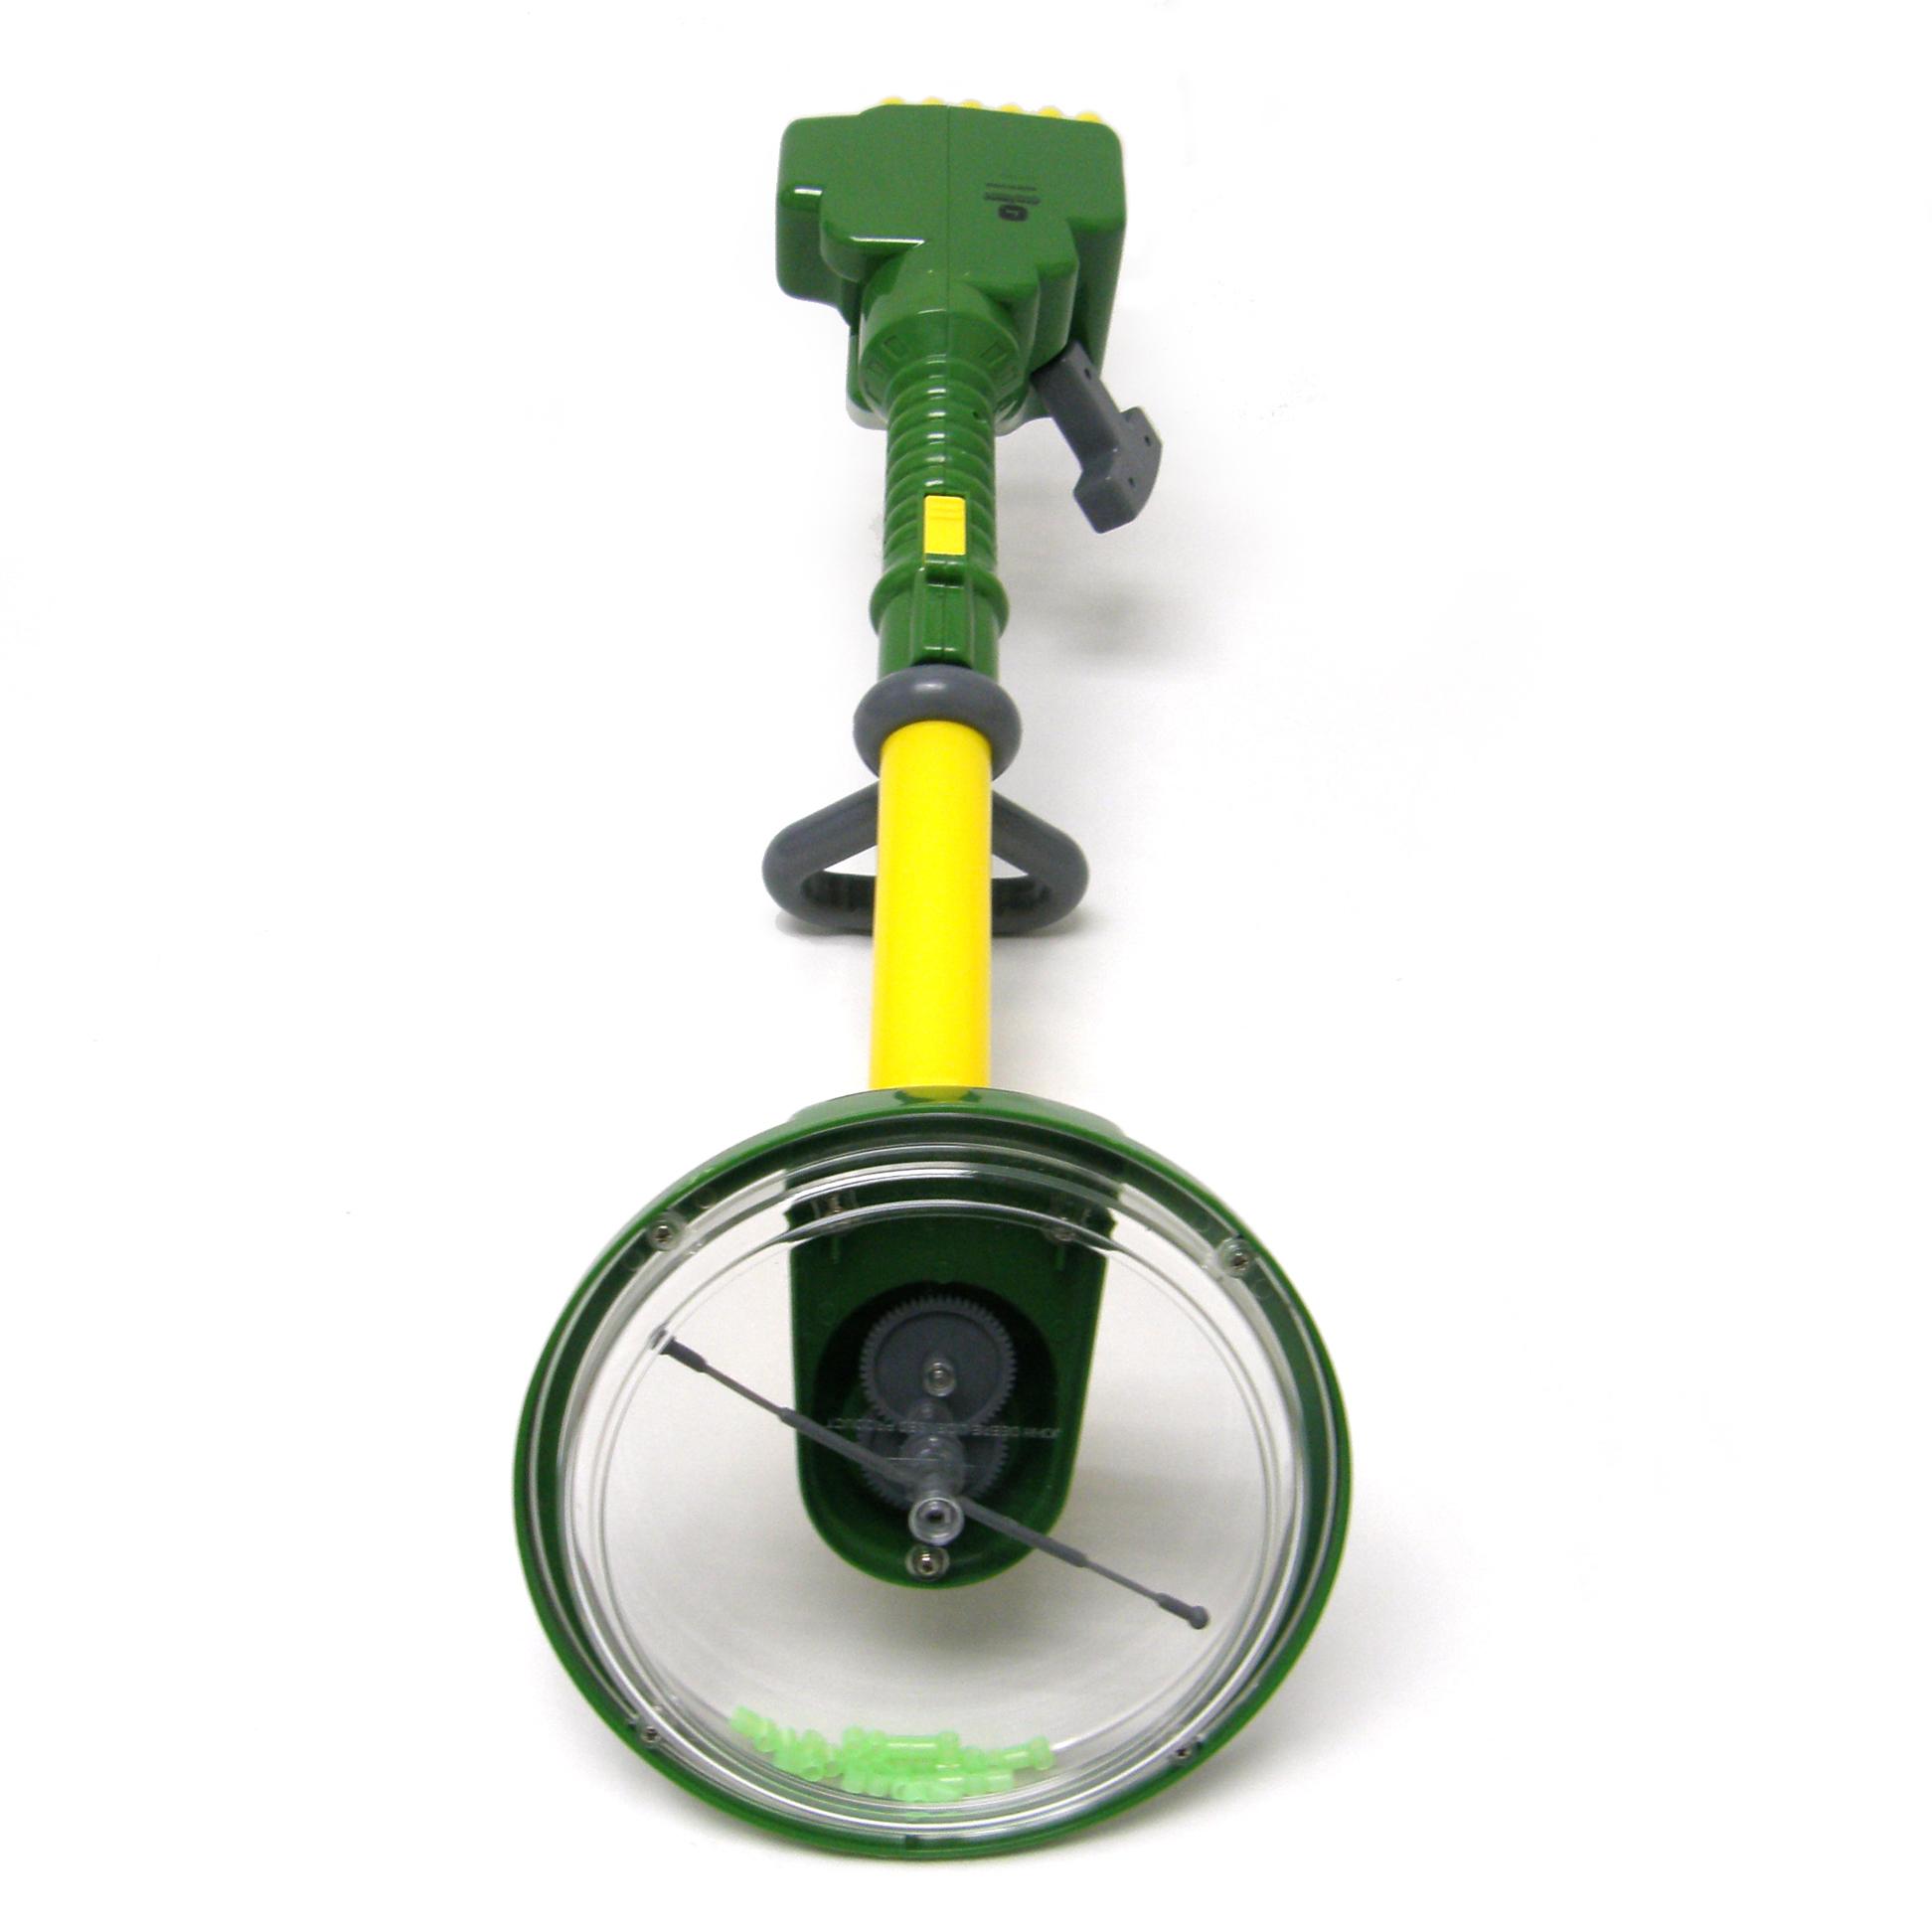 John Deere Power Trimmer Toy at Growing Tree Toys